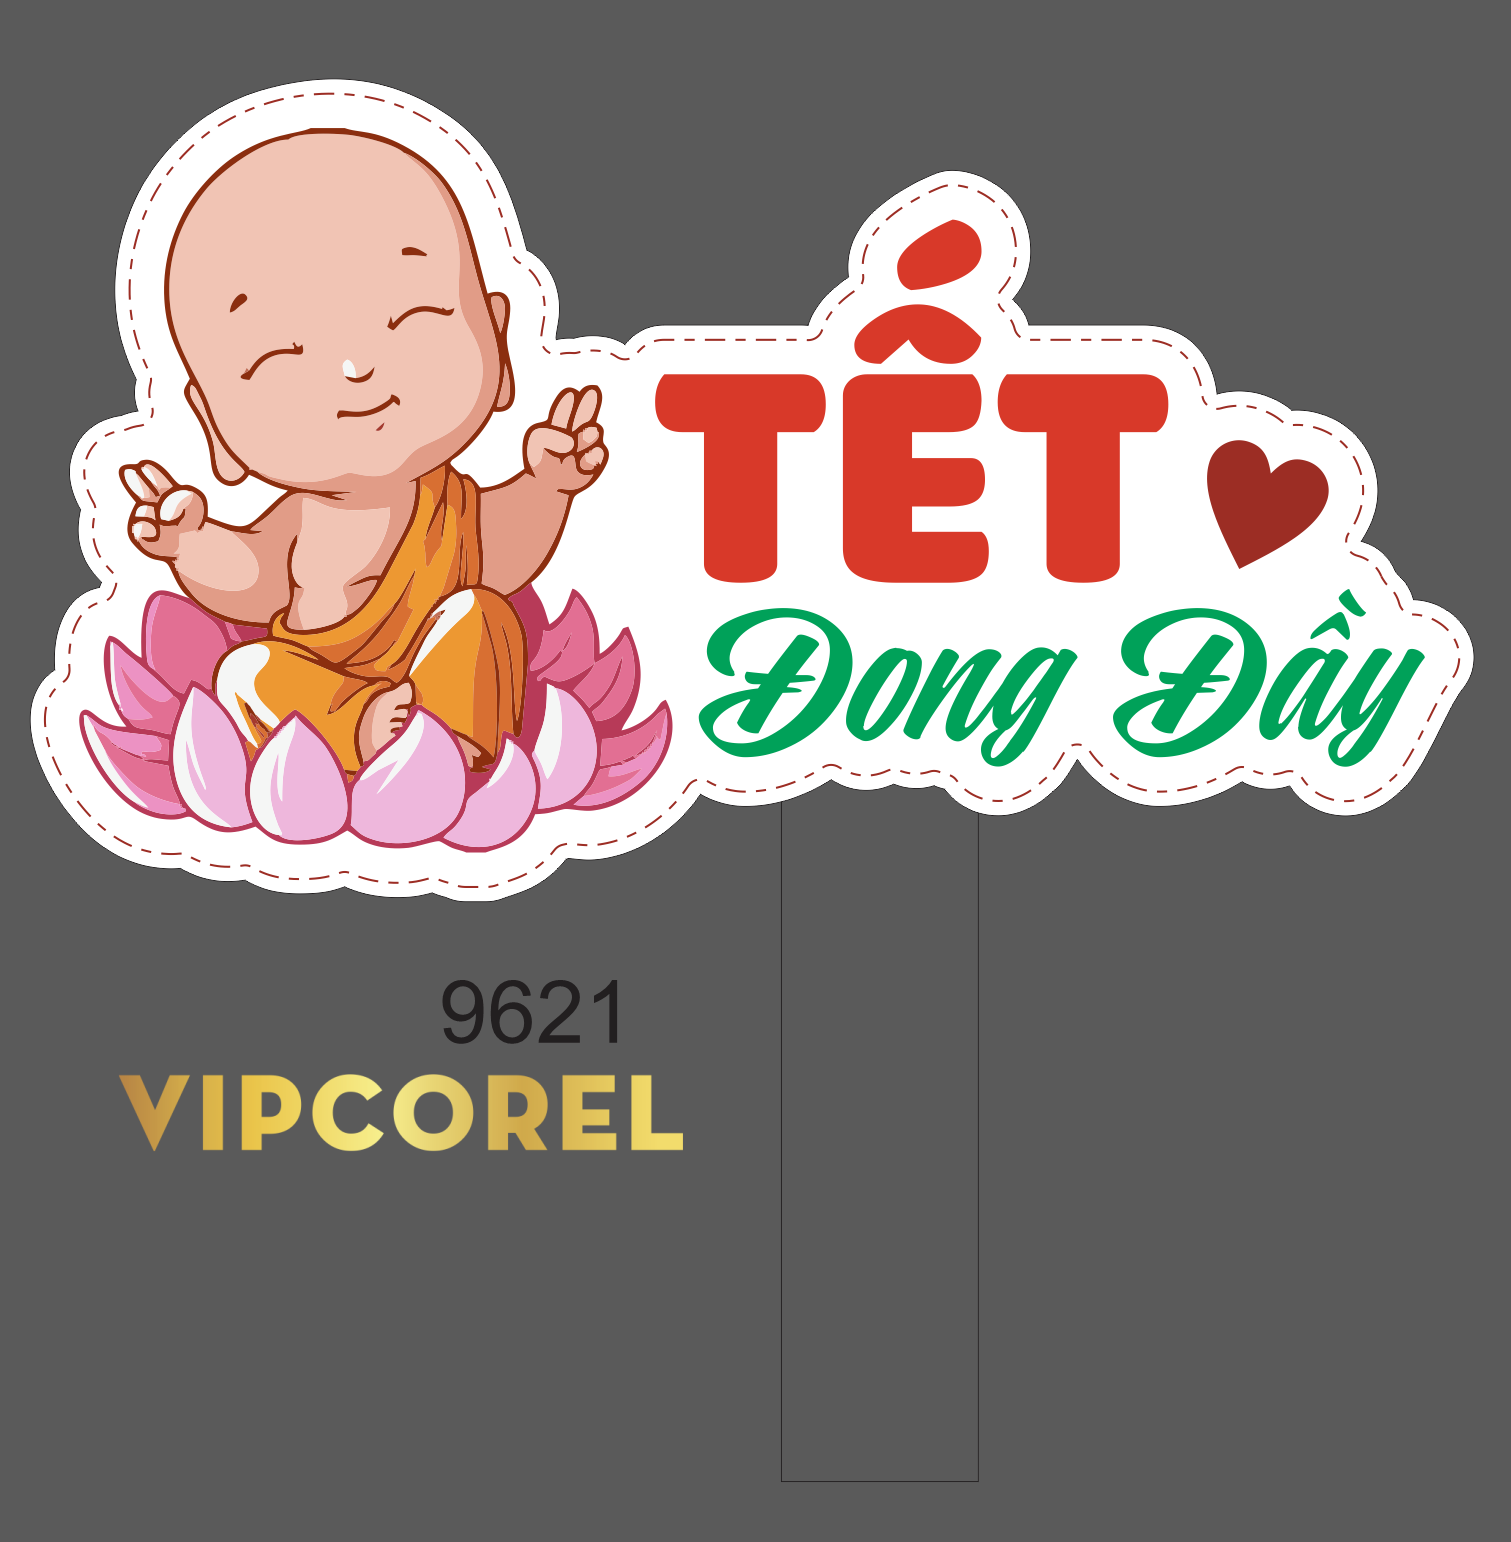 hastag tet dong day.png